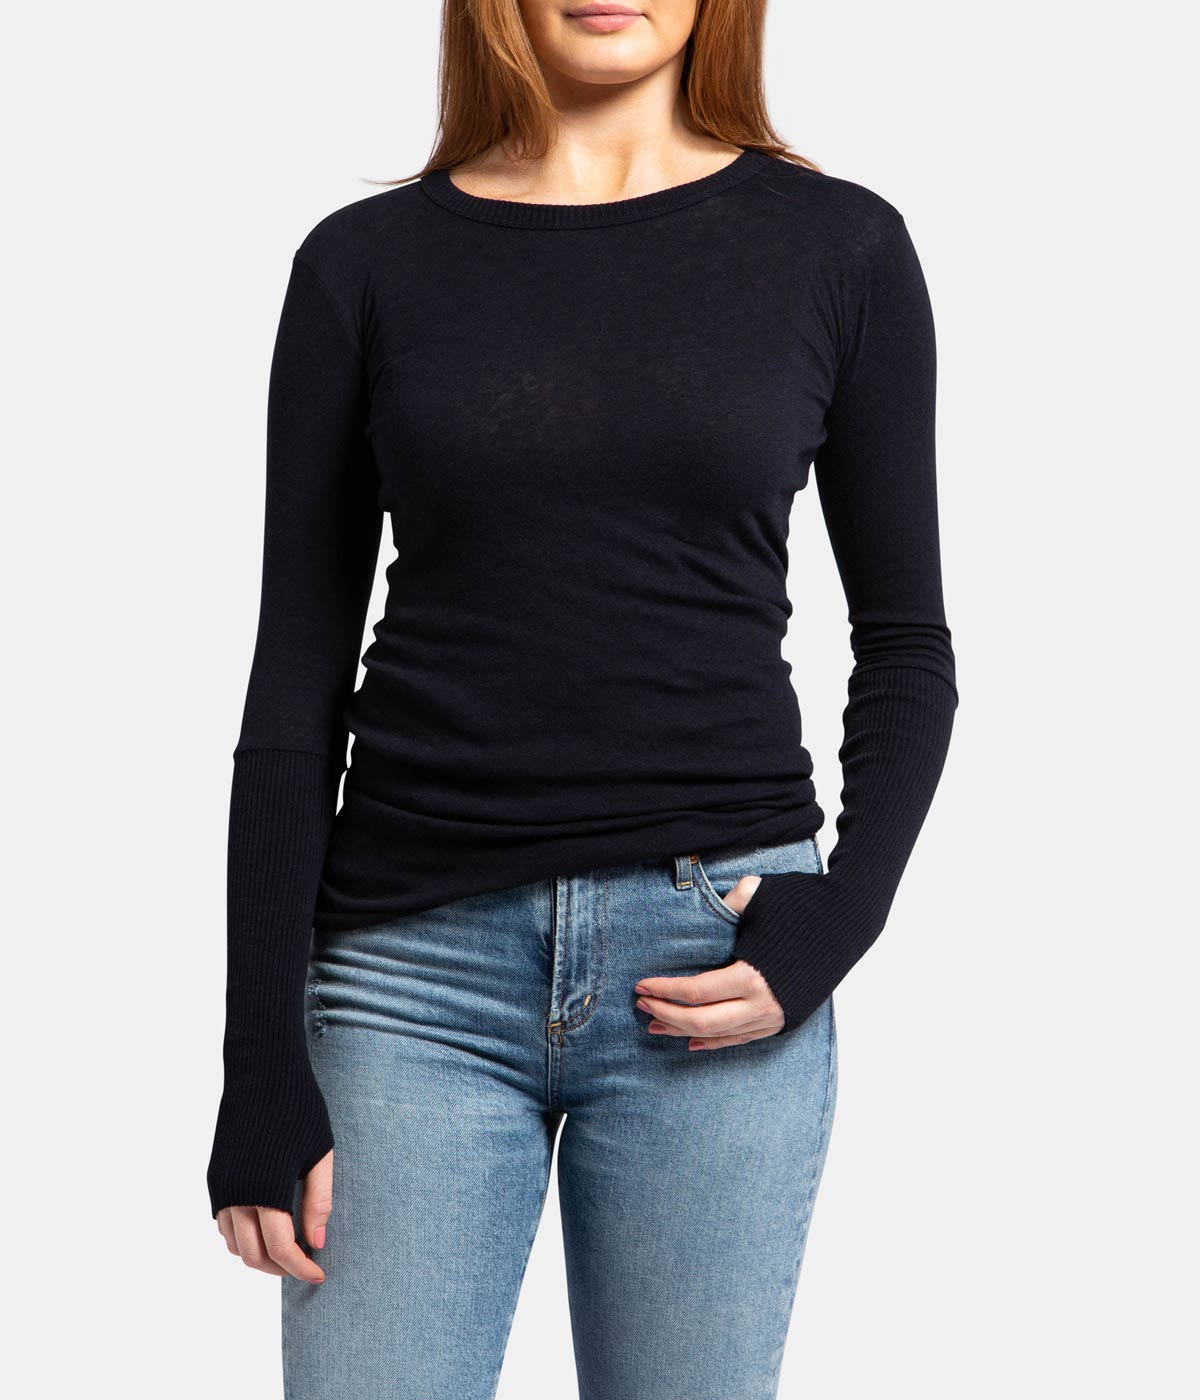 Cashmere Crew Neck Fitted Long Sleeve Top in Navy